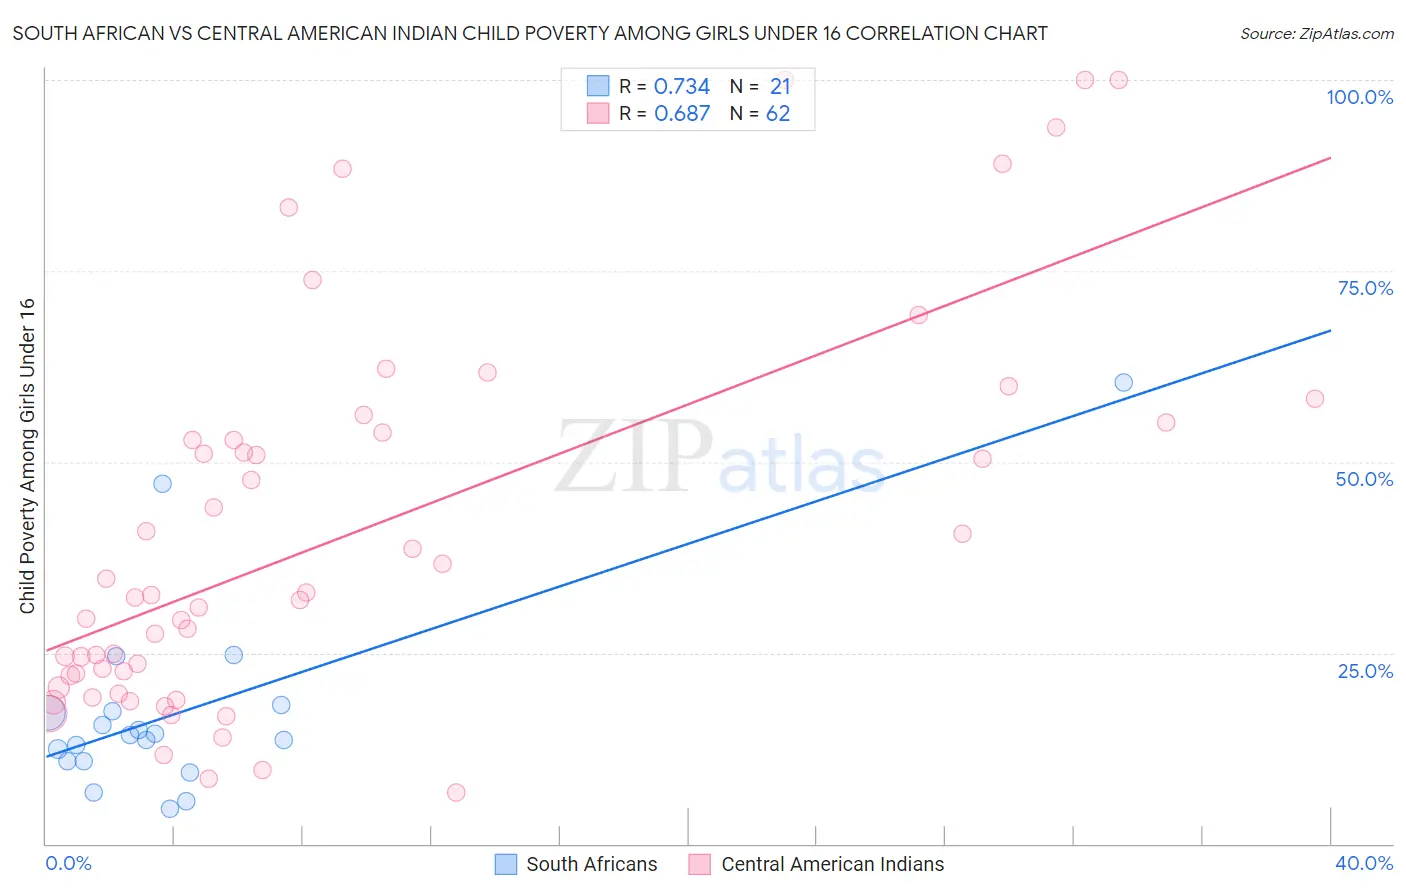 South African vs Central American Indian Child Poverty Among Girls Under 16